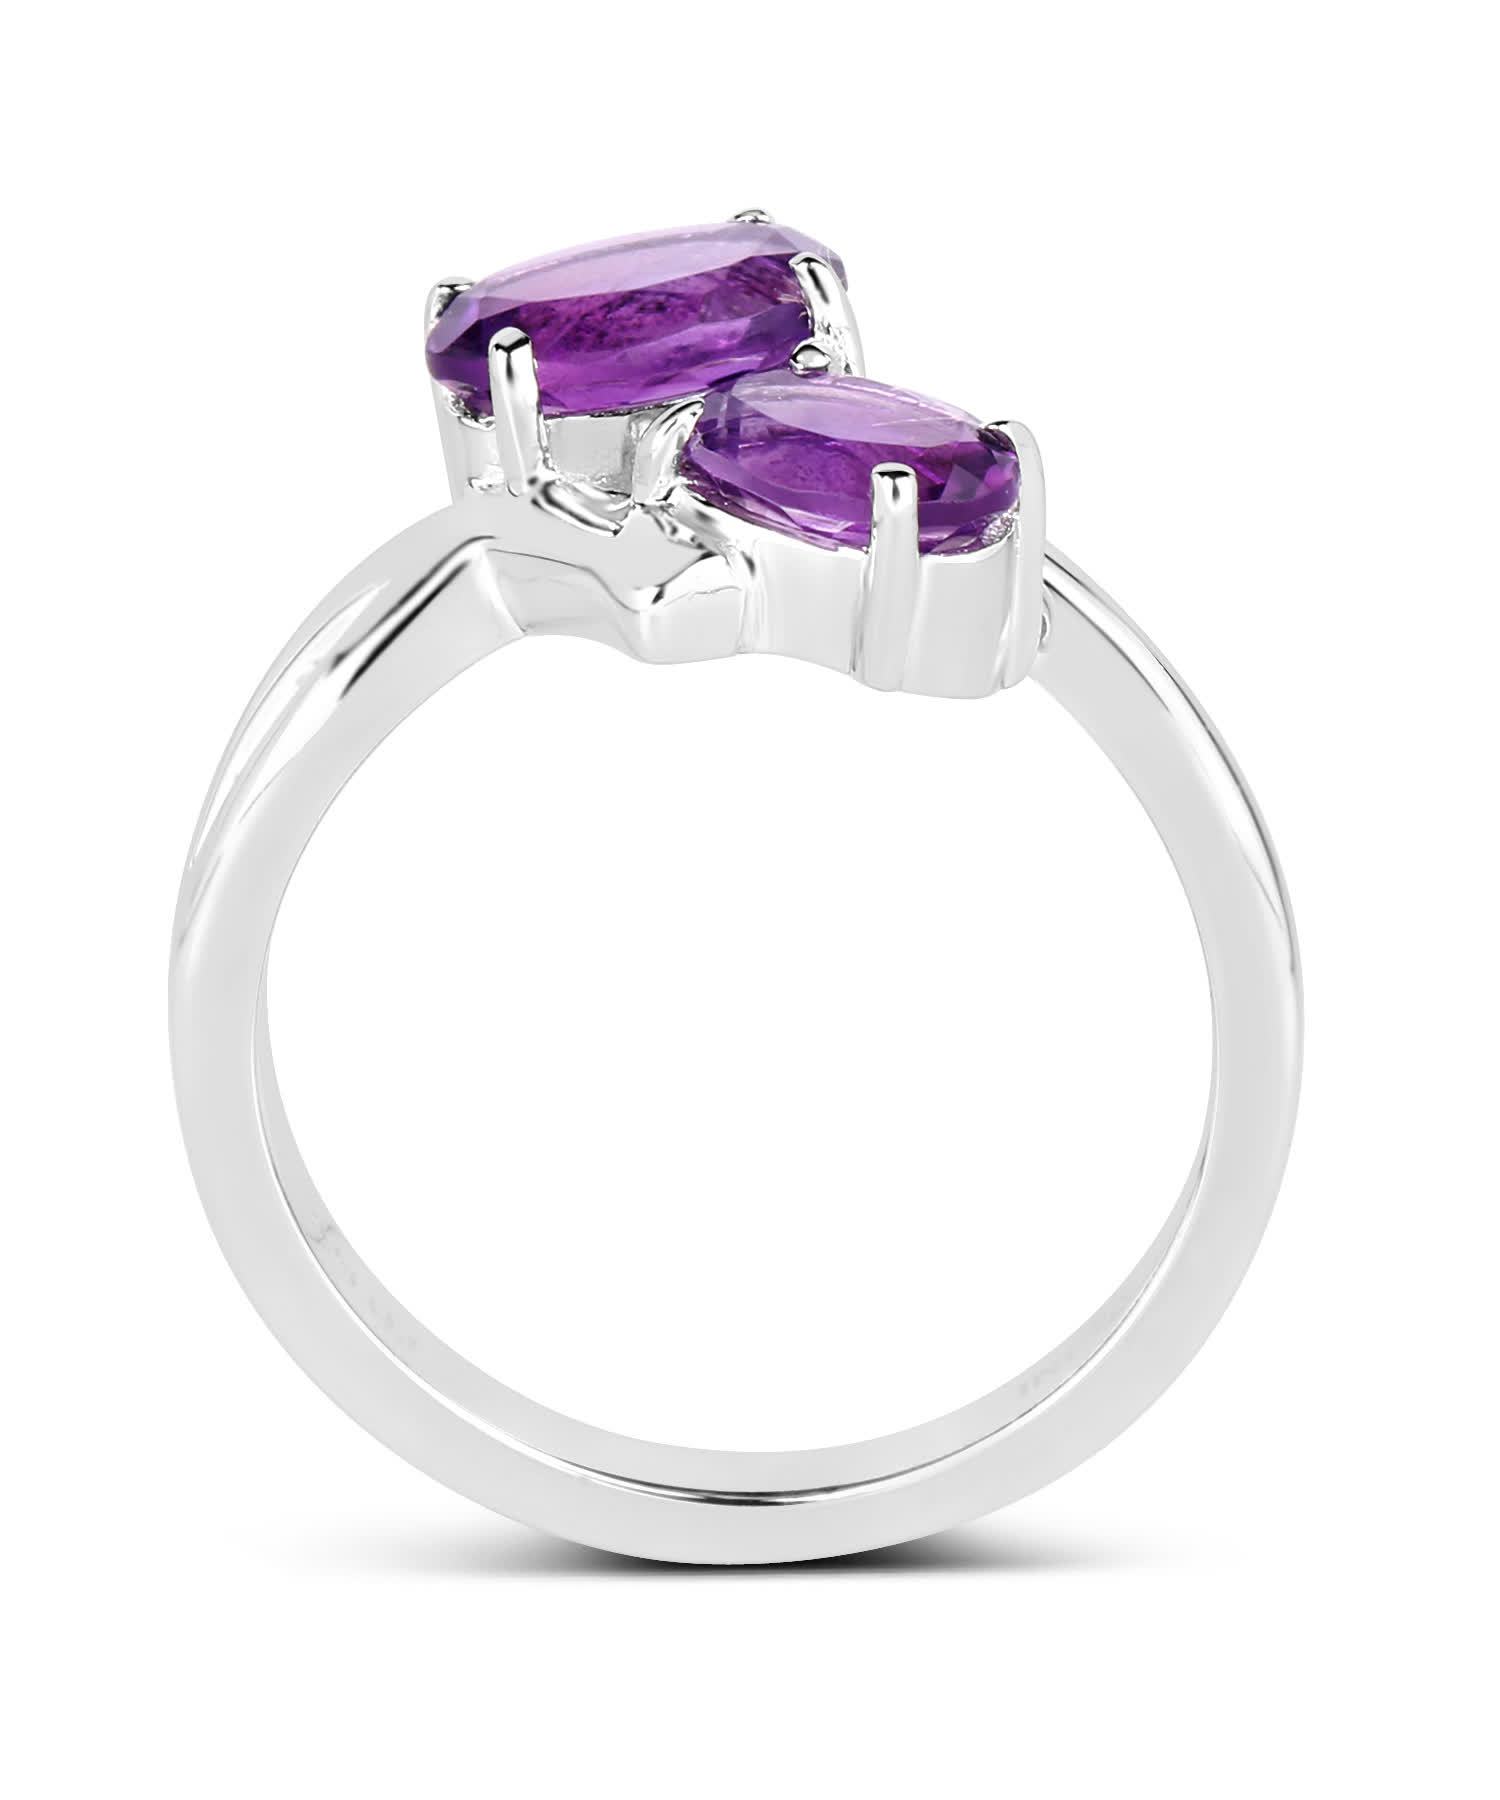 1.95ctw Natural Amethyst Rhodium Plated 925 Sterling Silver Two-Stone Ring View 2